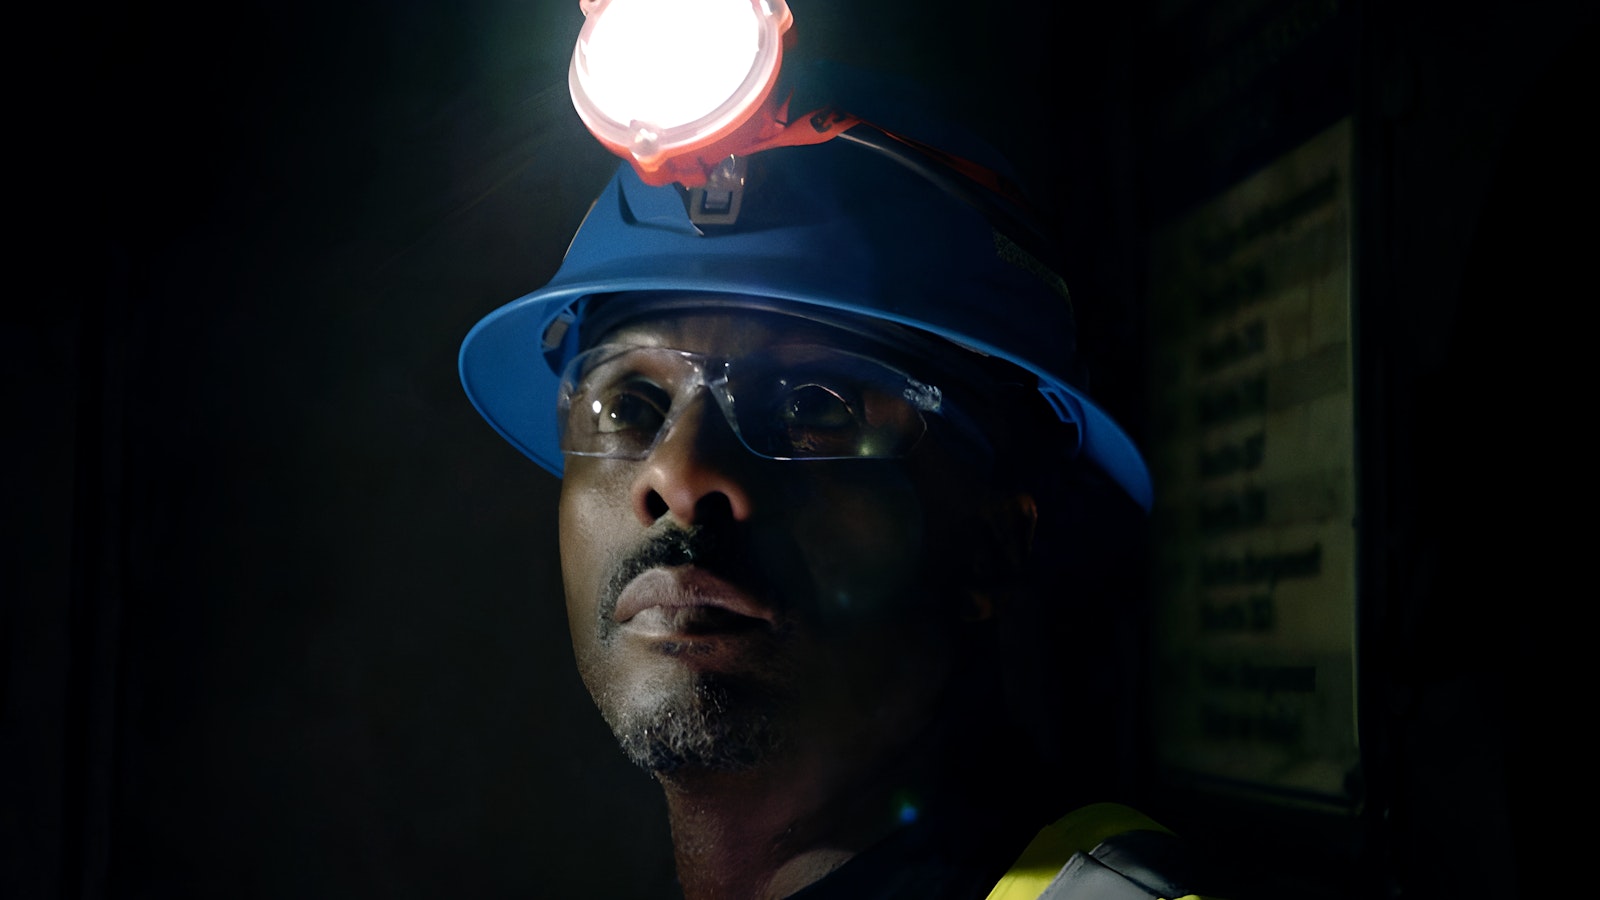 Idris Elba looks into the dark at LaRonde Complex wearing a blue hard hat fitted with a safety lamp.